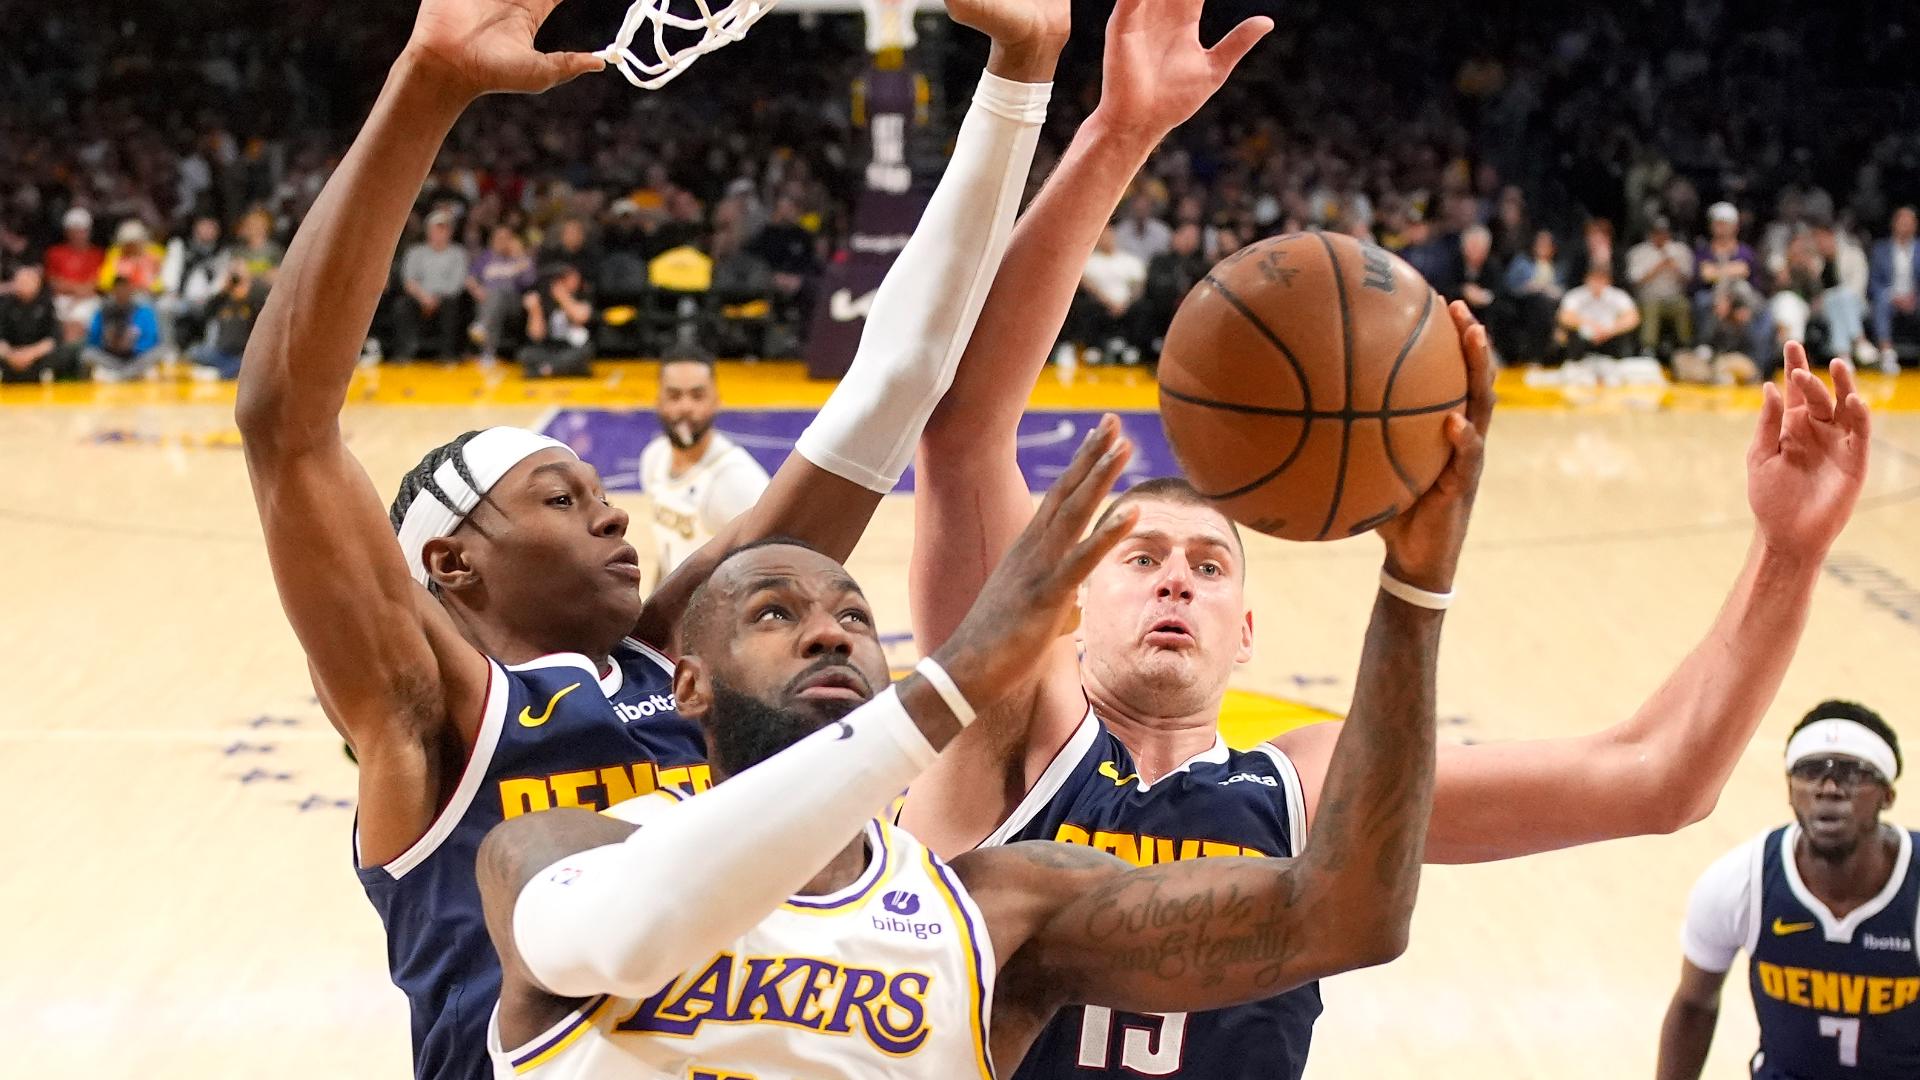 The Lakers snapped their 11-game losing streak against the defending NBA champions.